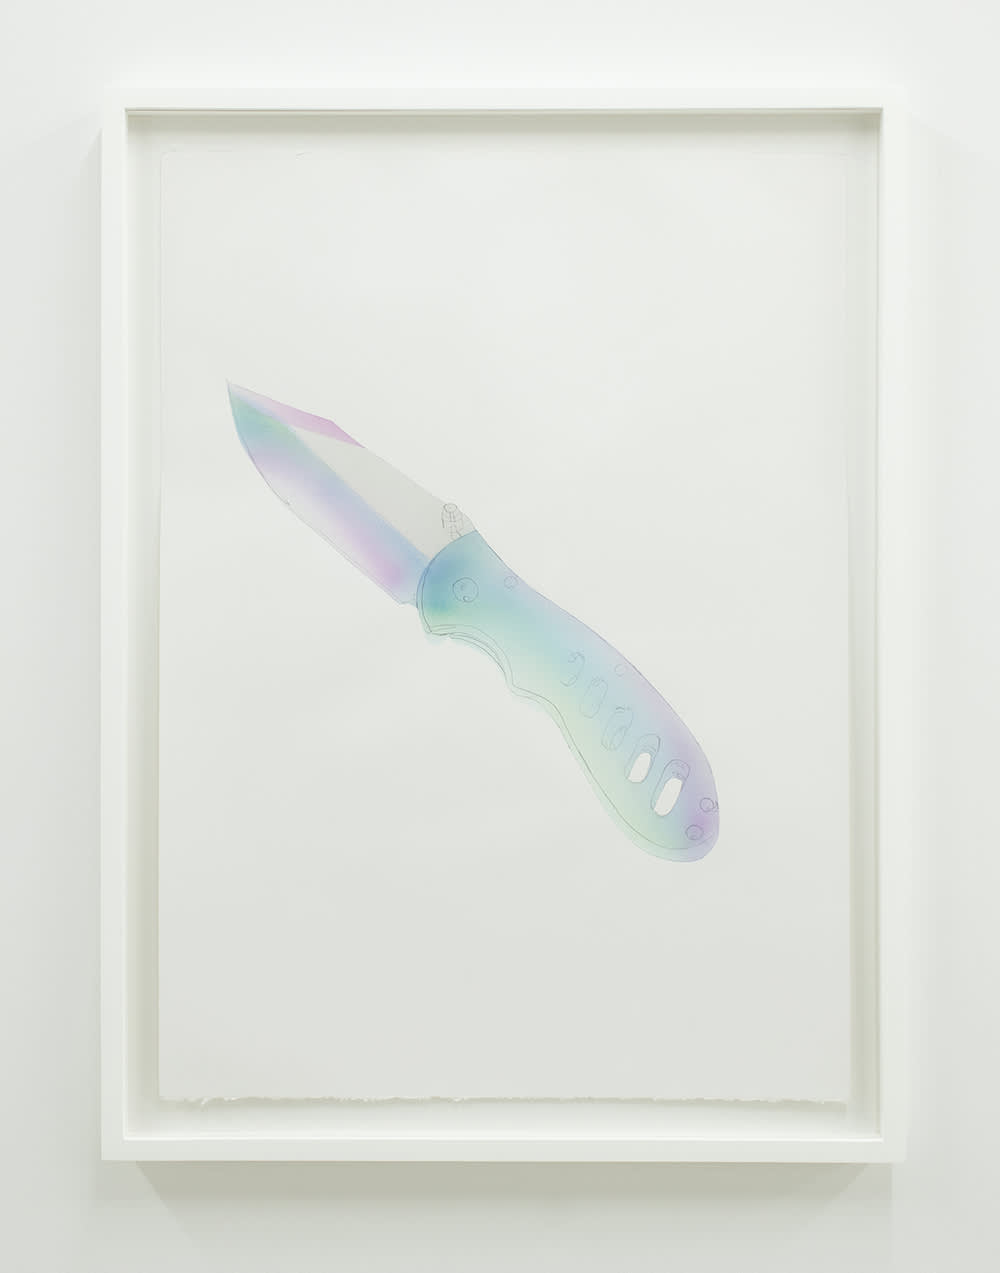 Water color drawing of an iridescent pocket knife on a blank white background inside a white frame.